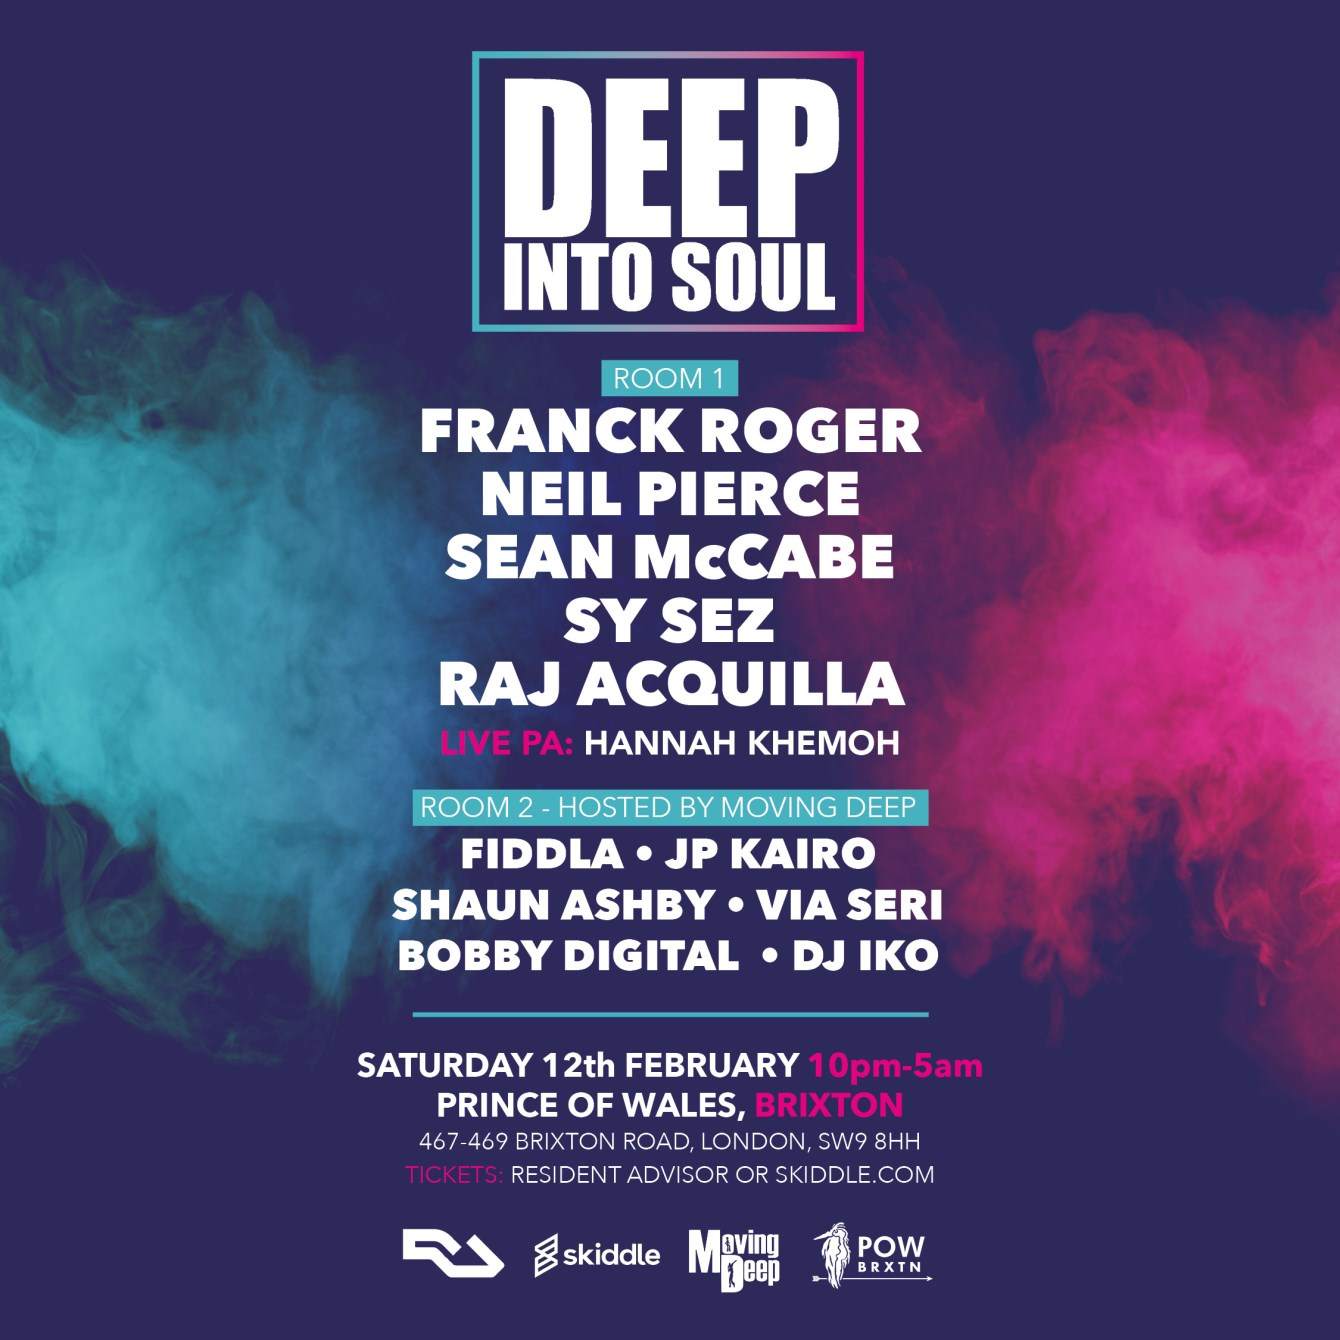 Deep Into Soul with Franck Roger & Sean Mccabe - フライヤー表